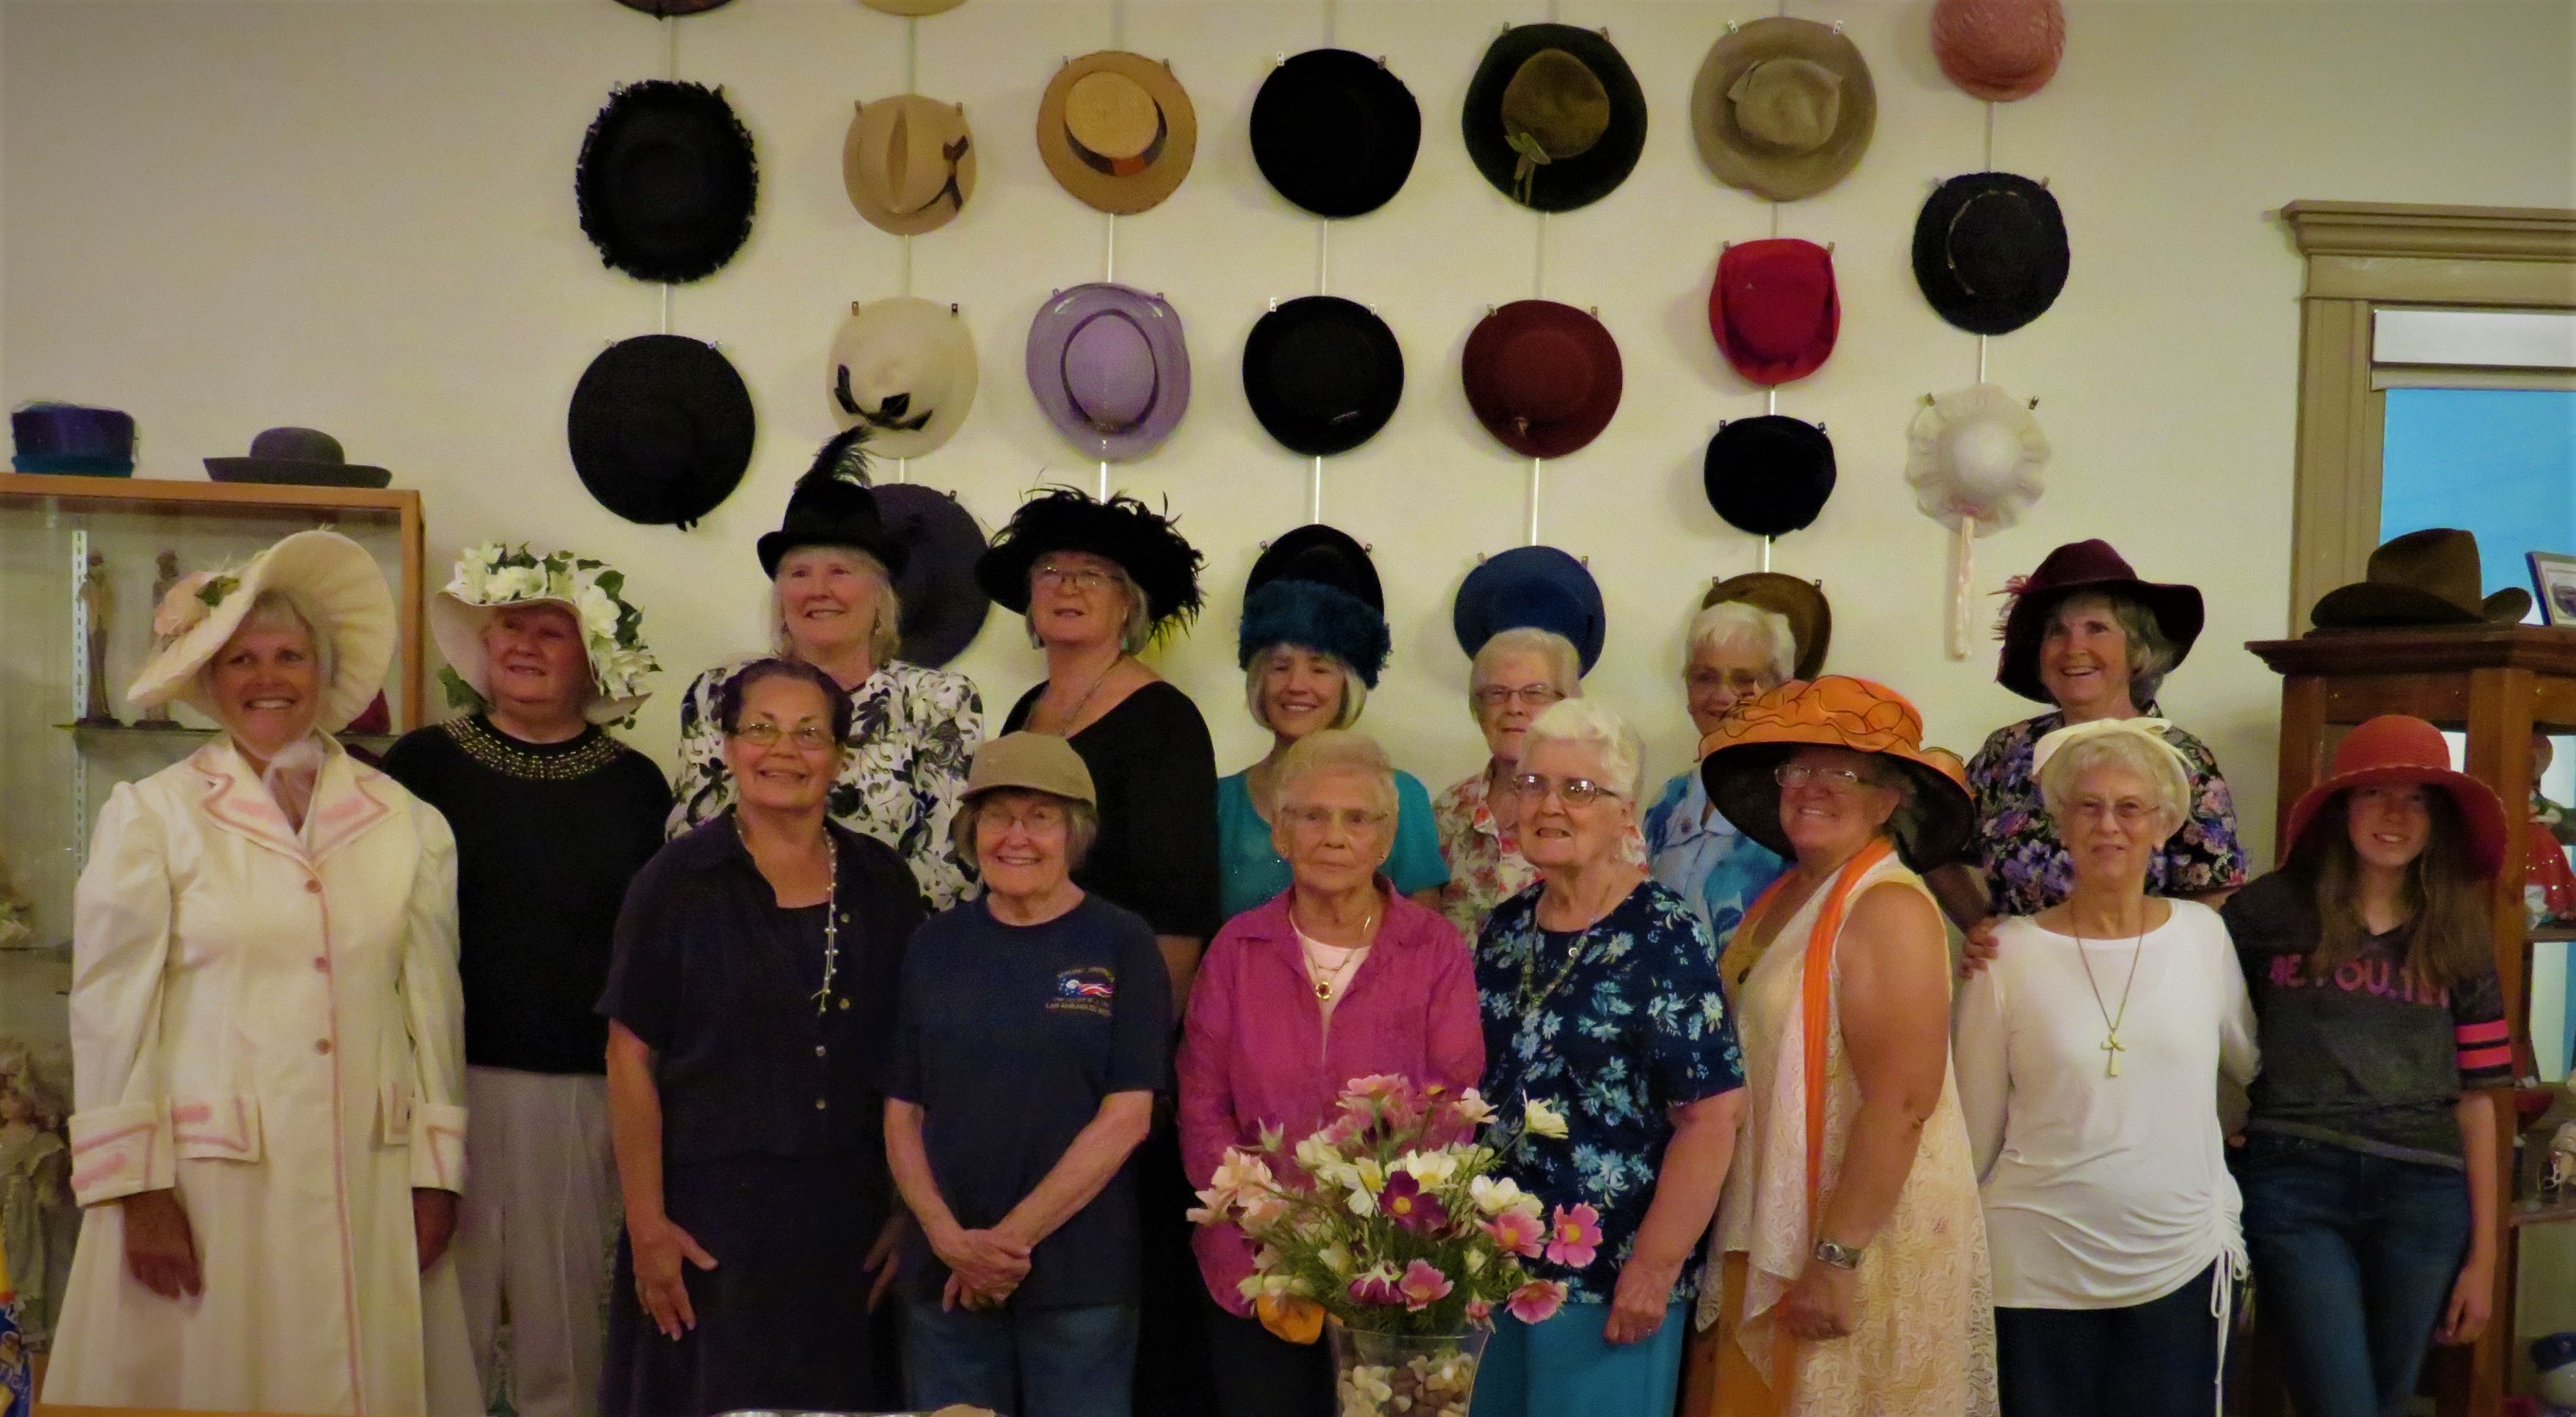 Hats-off-group-82519